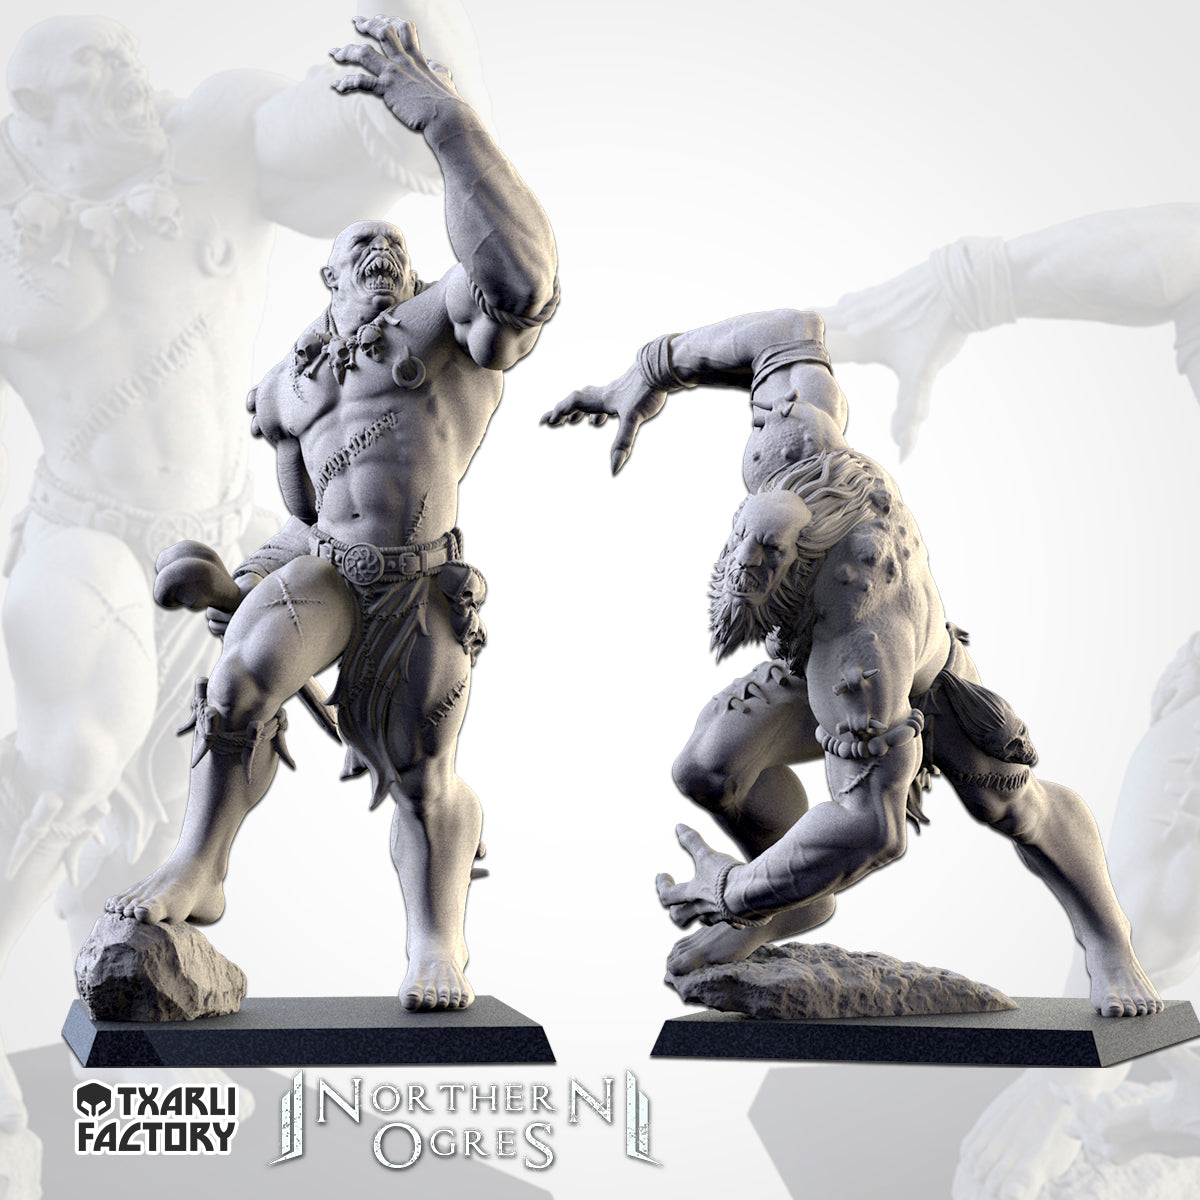 Northern Ogre Gorgers from Txarli Factory